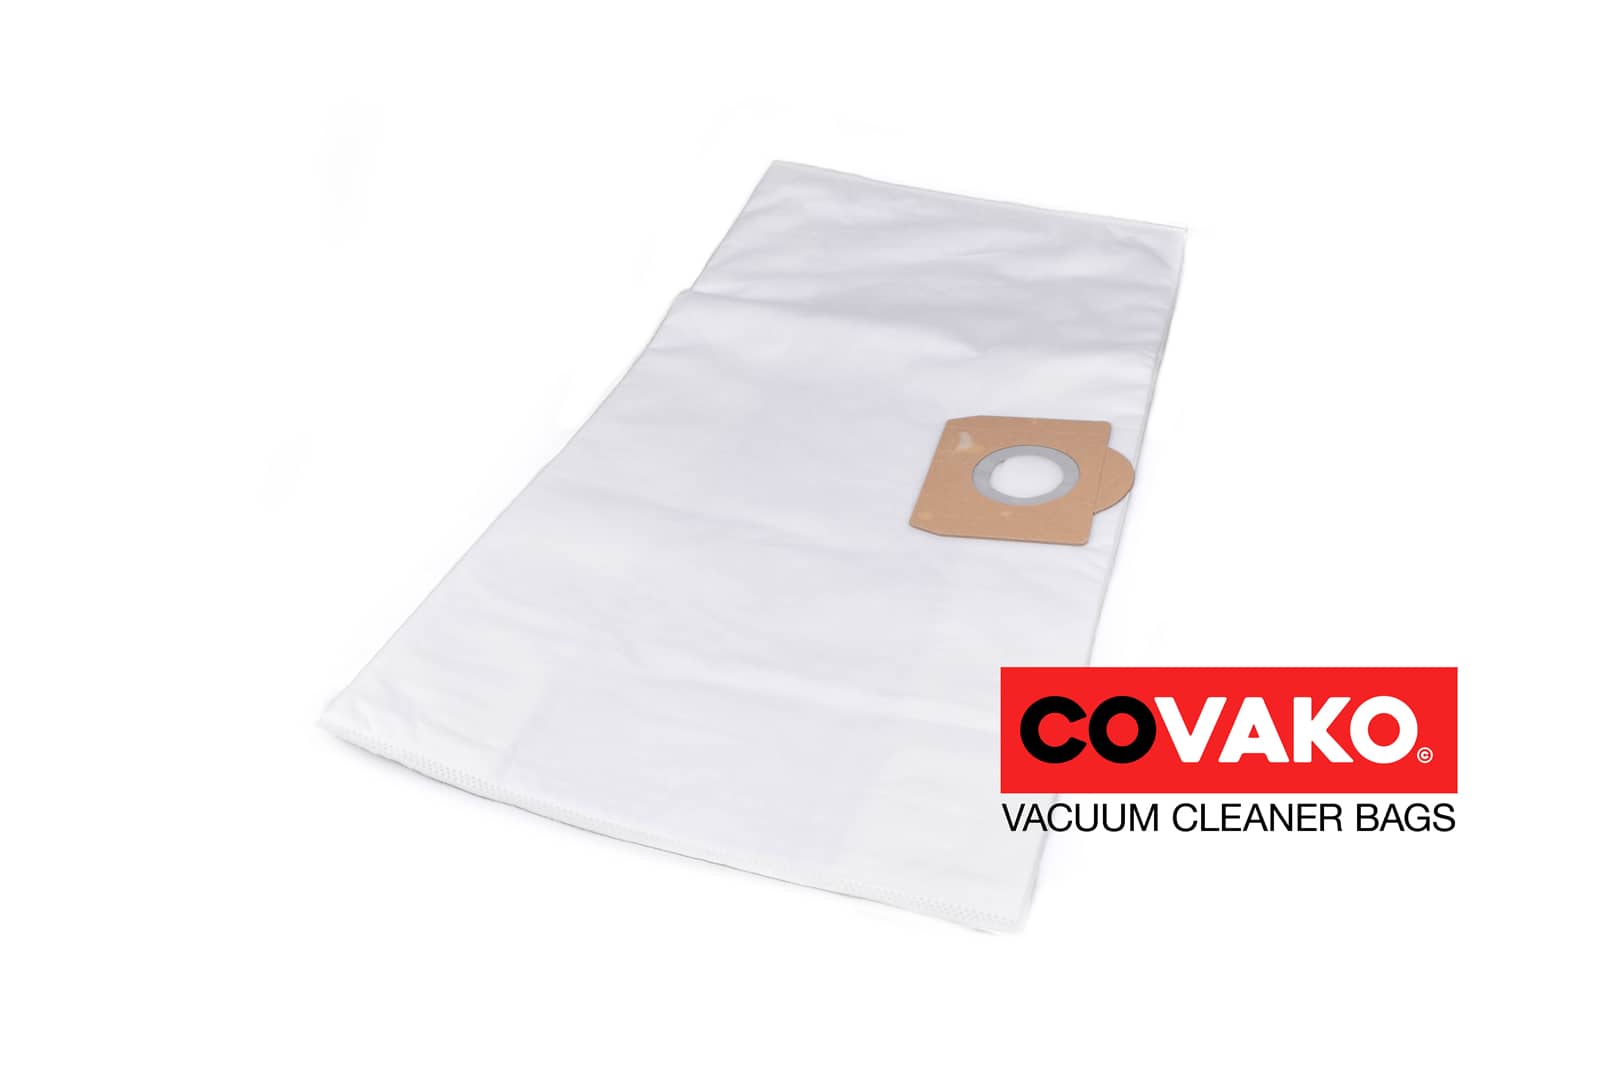 Soteco Nevada 503 / Synthesis - Soteco vacuum cleaner bags